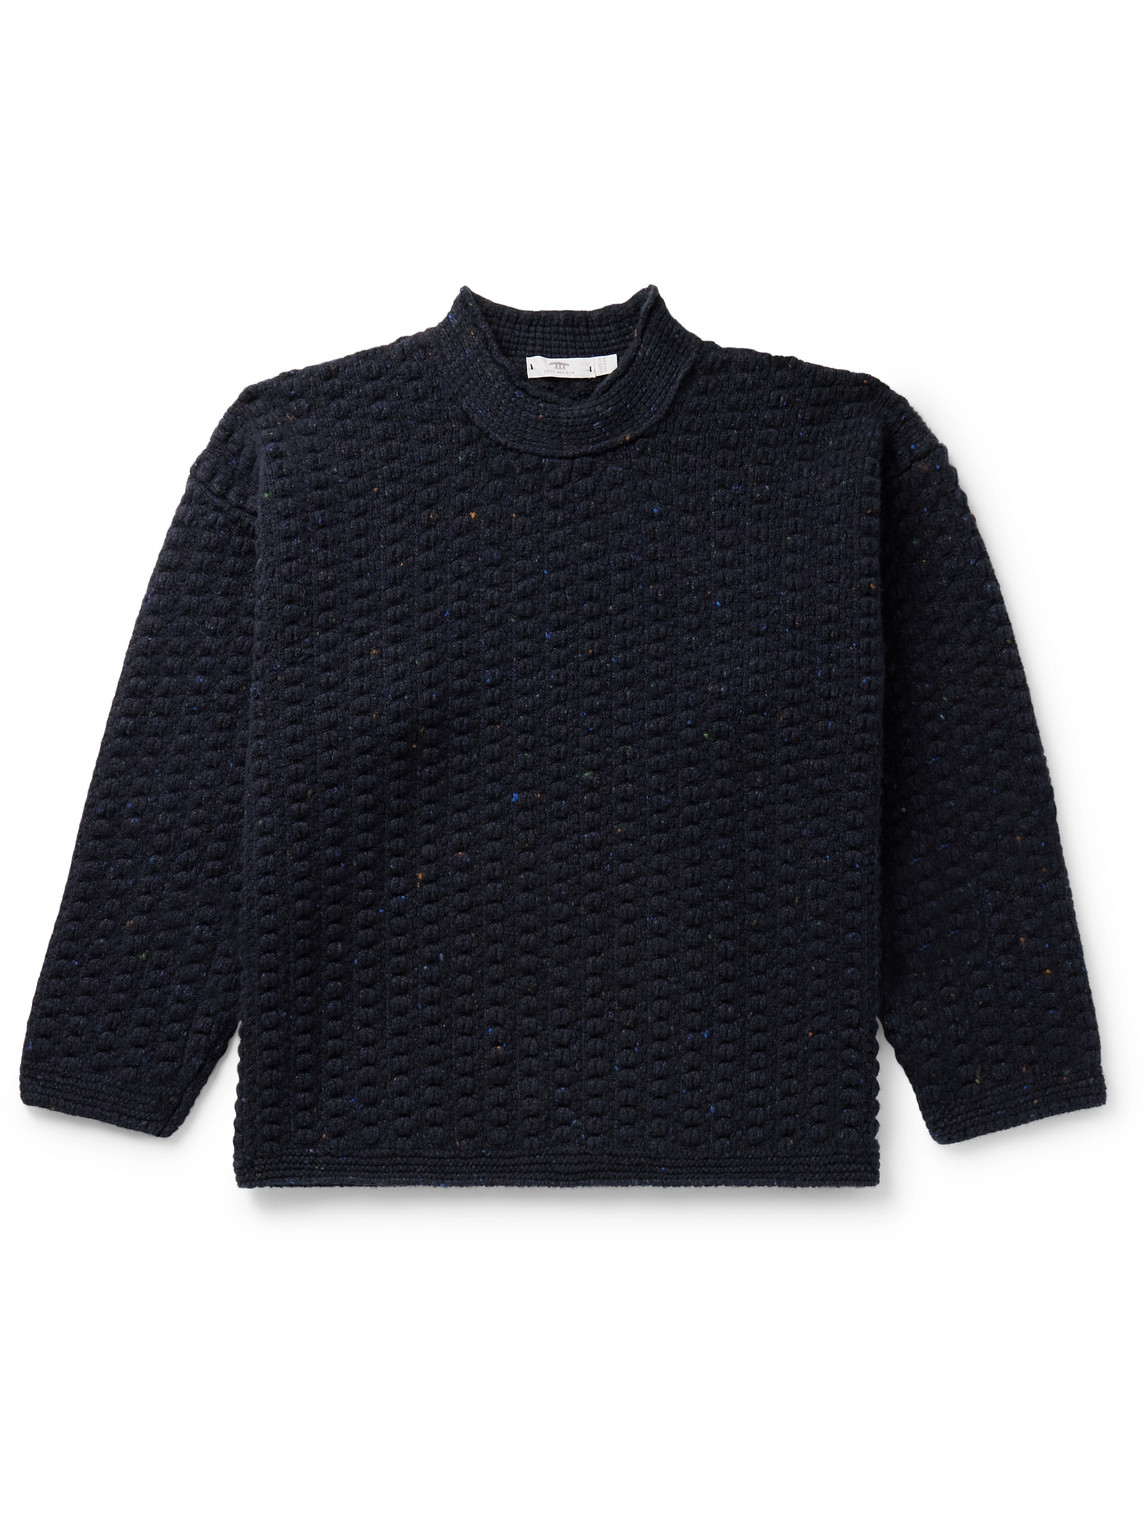 Inis Meáin Donegal Merino Wool and Cashmere-Blend Mock-Neck Sweater